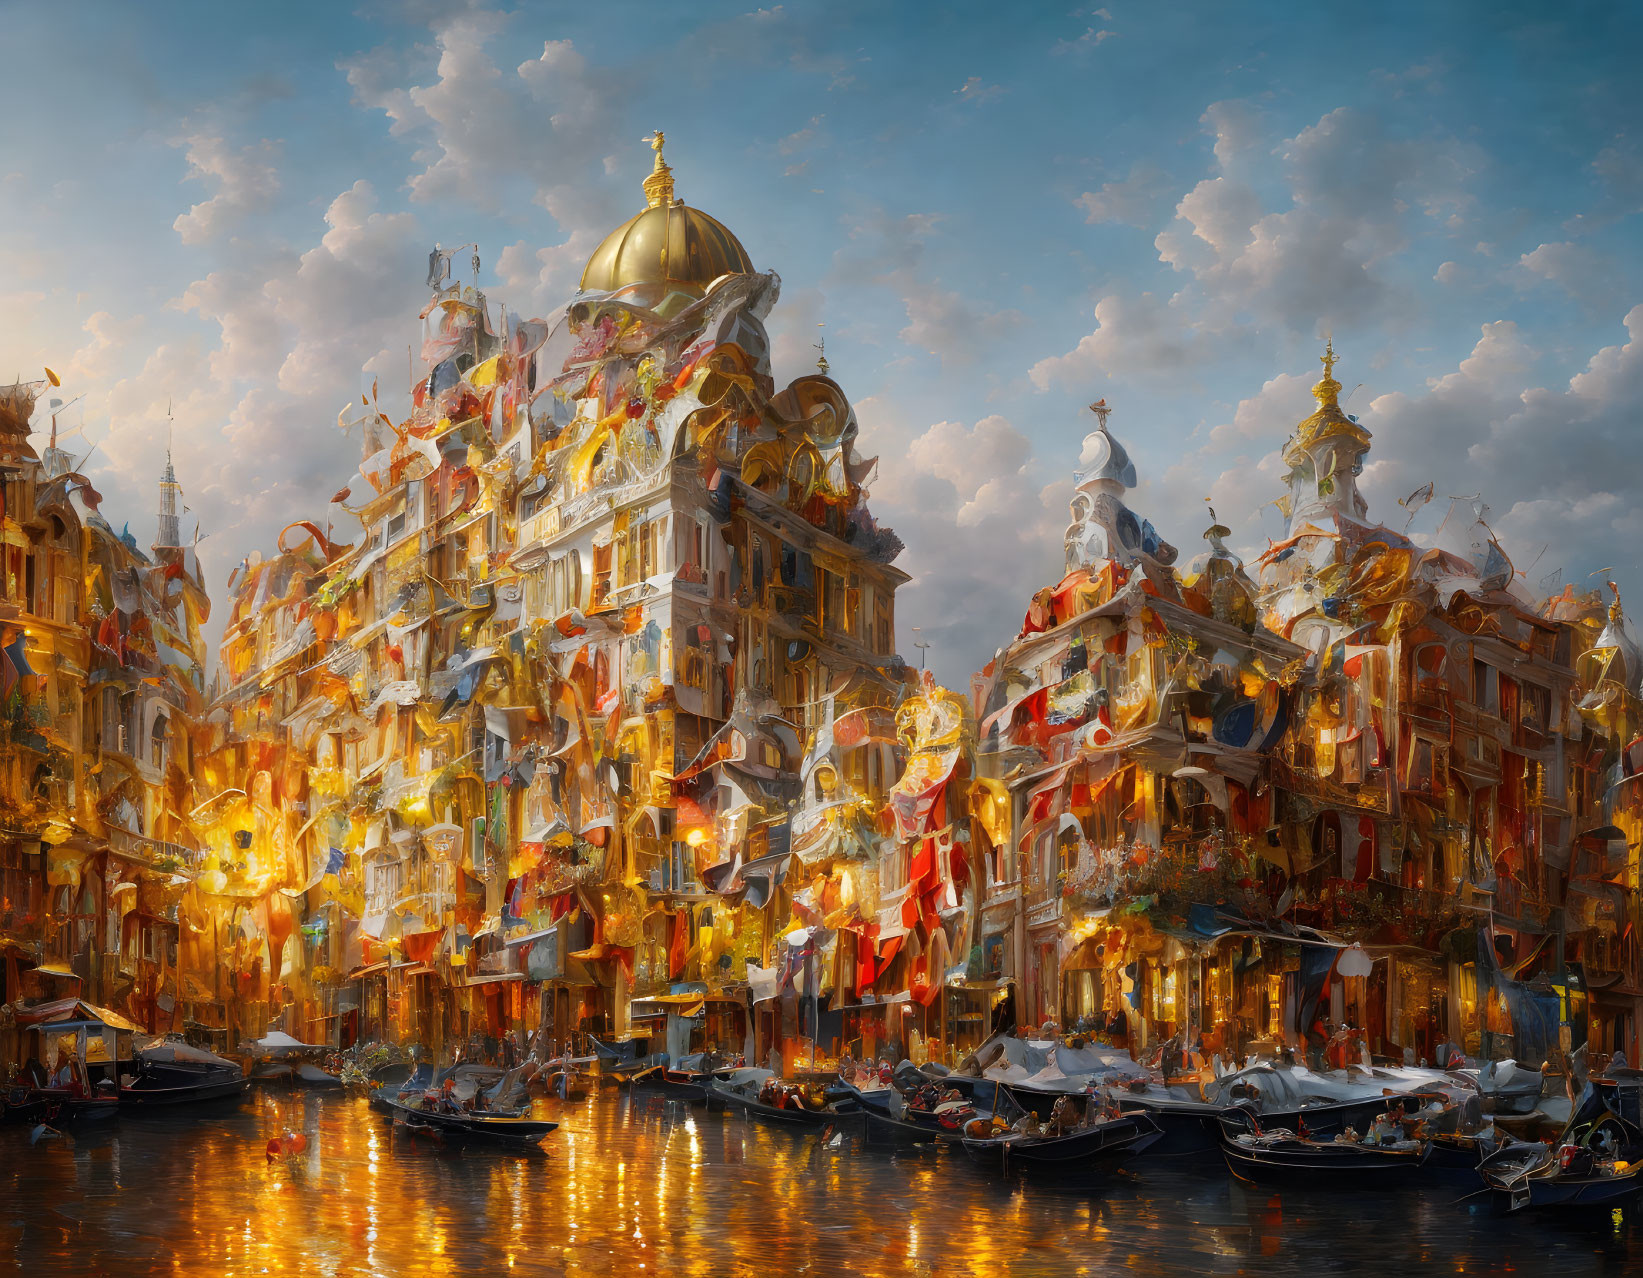 Golden cityscape with ornate buildings and water canals under a warm sky